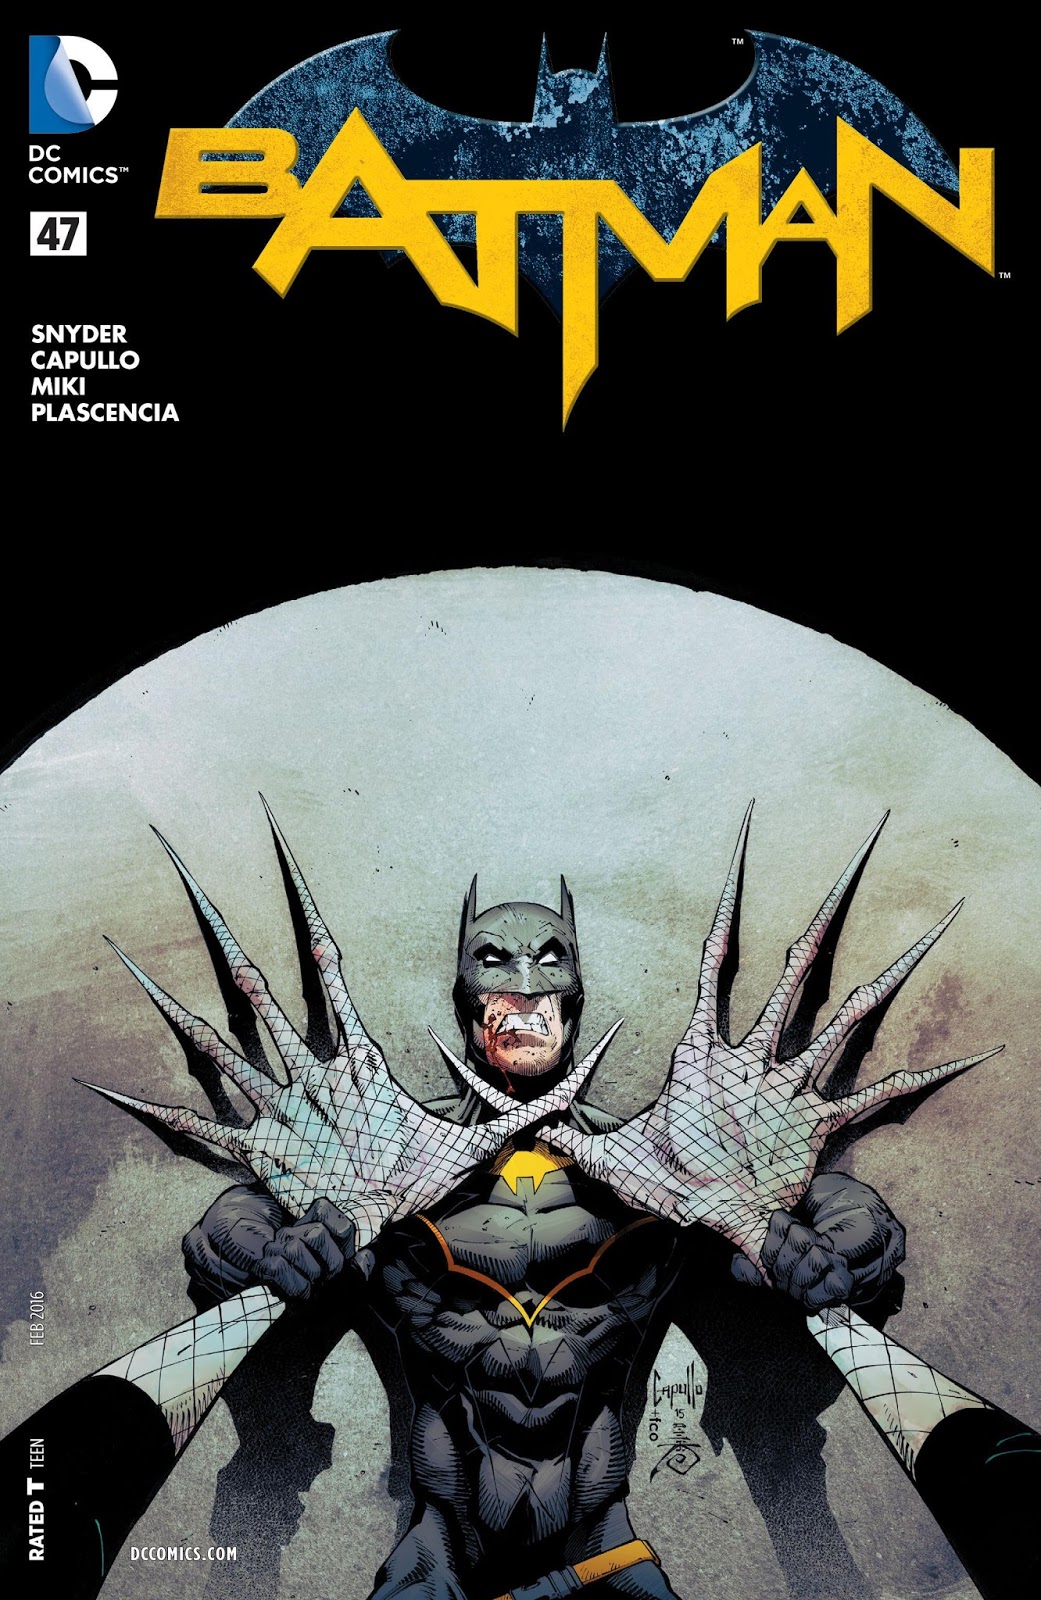 Weird Science DC Comics: Batman #47 Review and *SPOILERS*